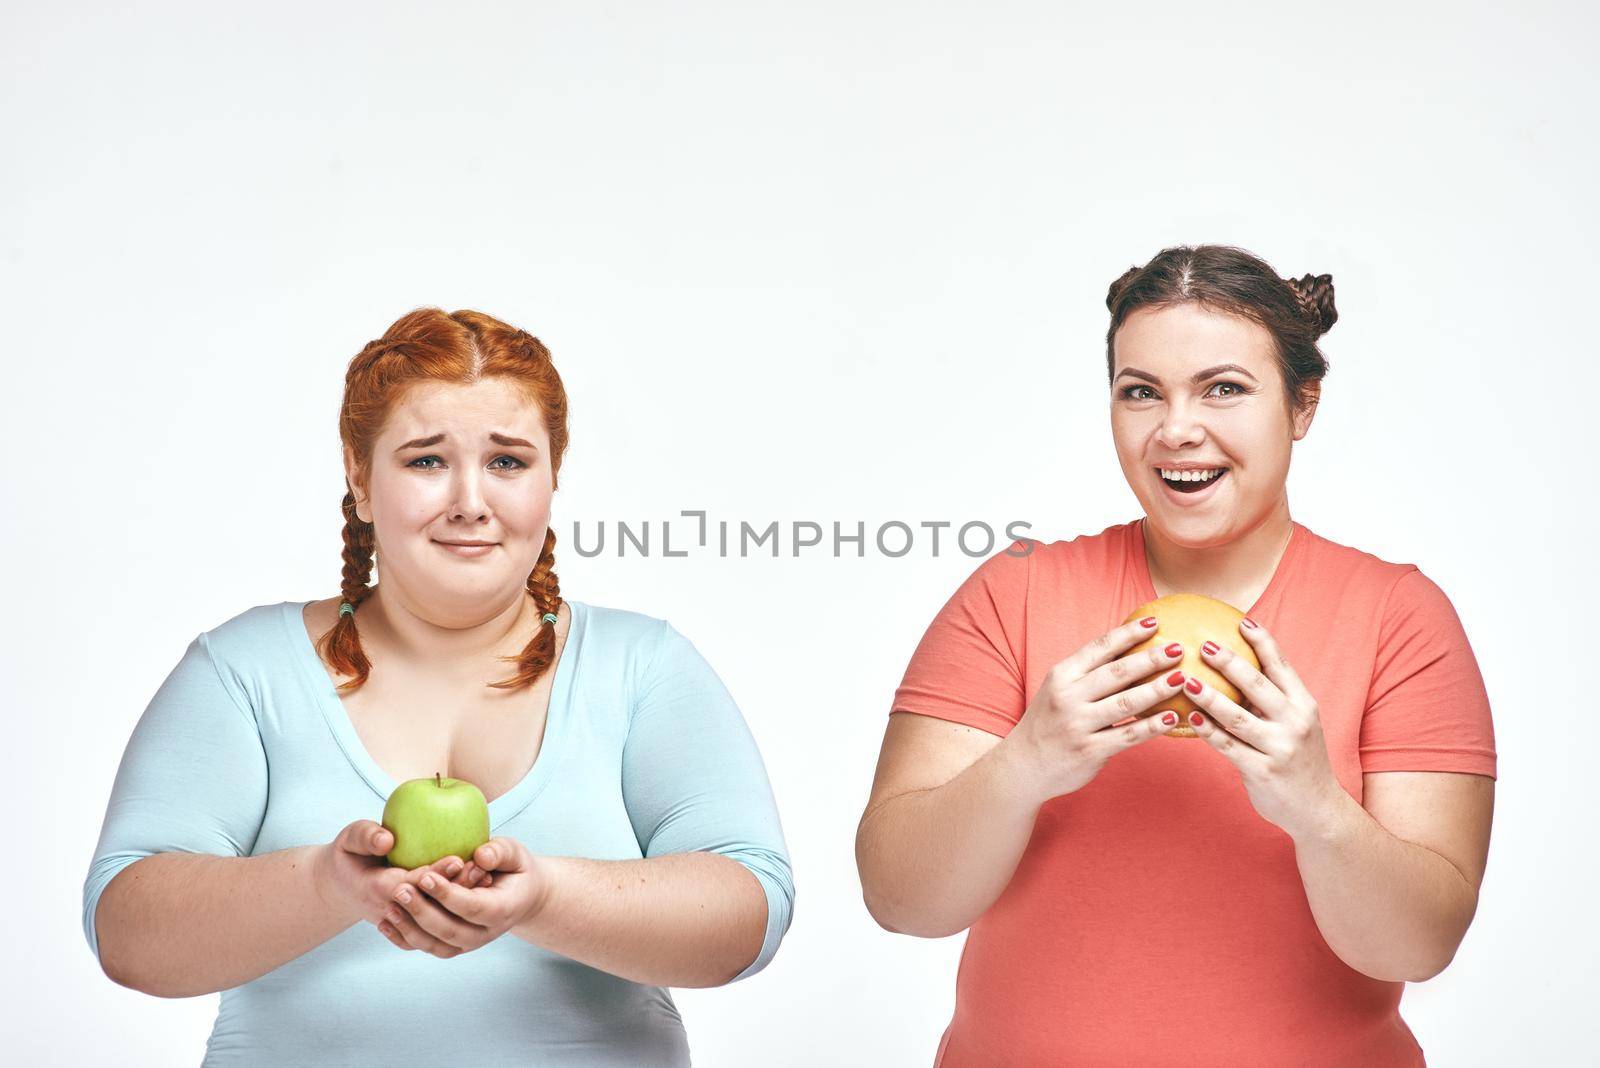 Funny picture of amusing chubby women on white background. One woman holding a sandwich, the other holding an apple.